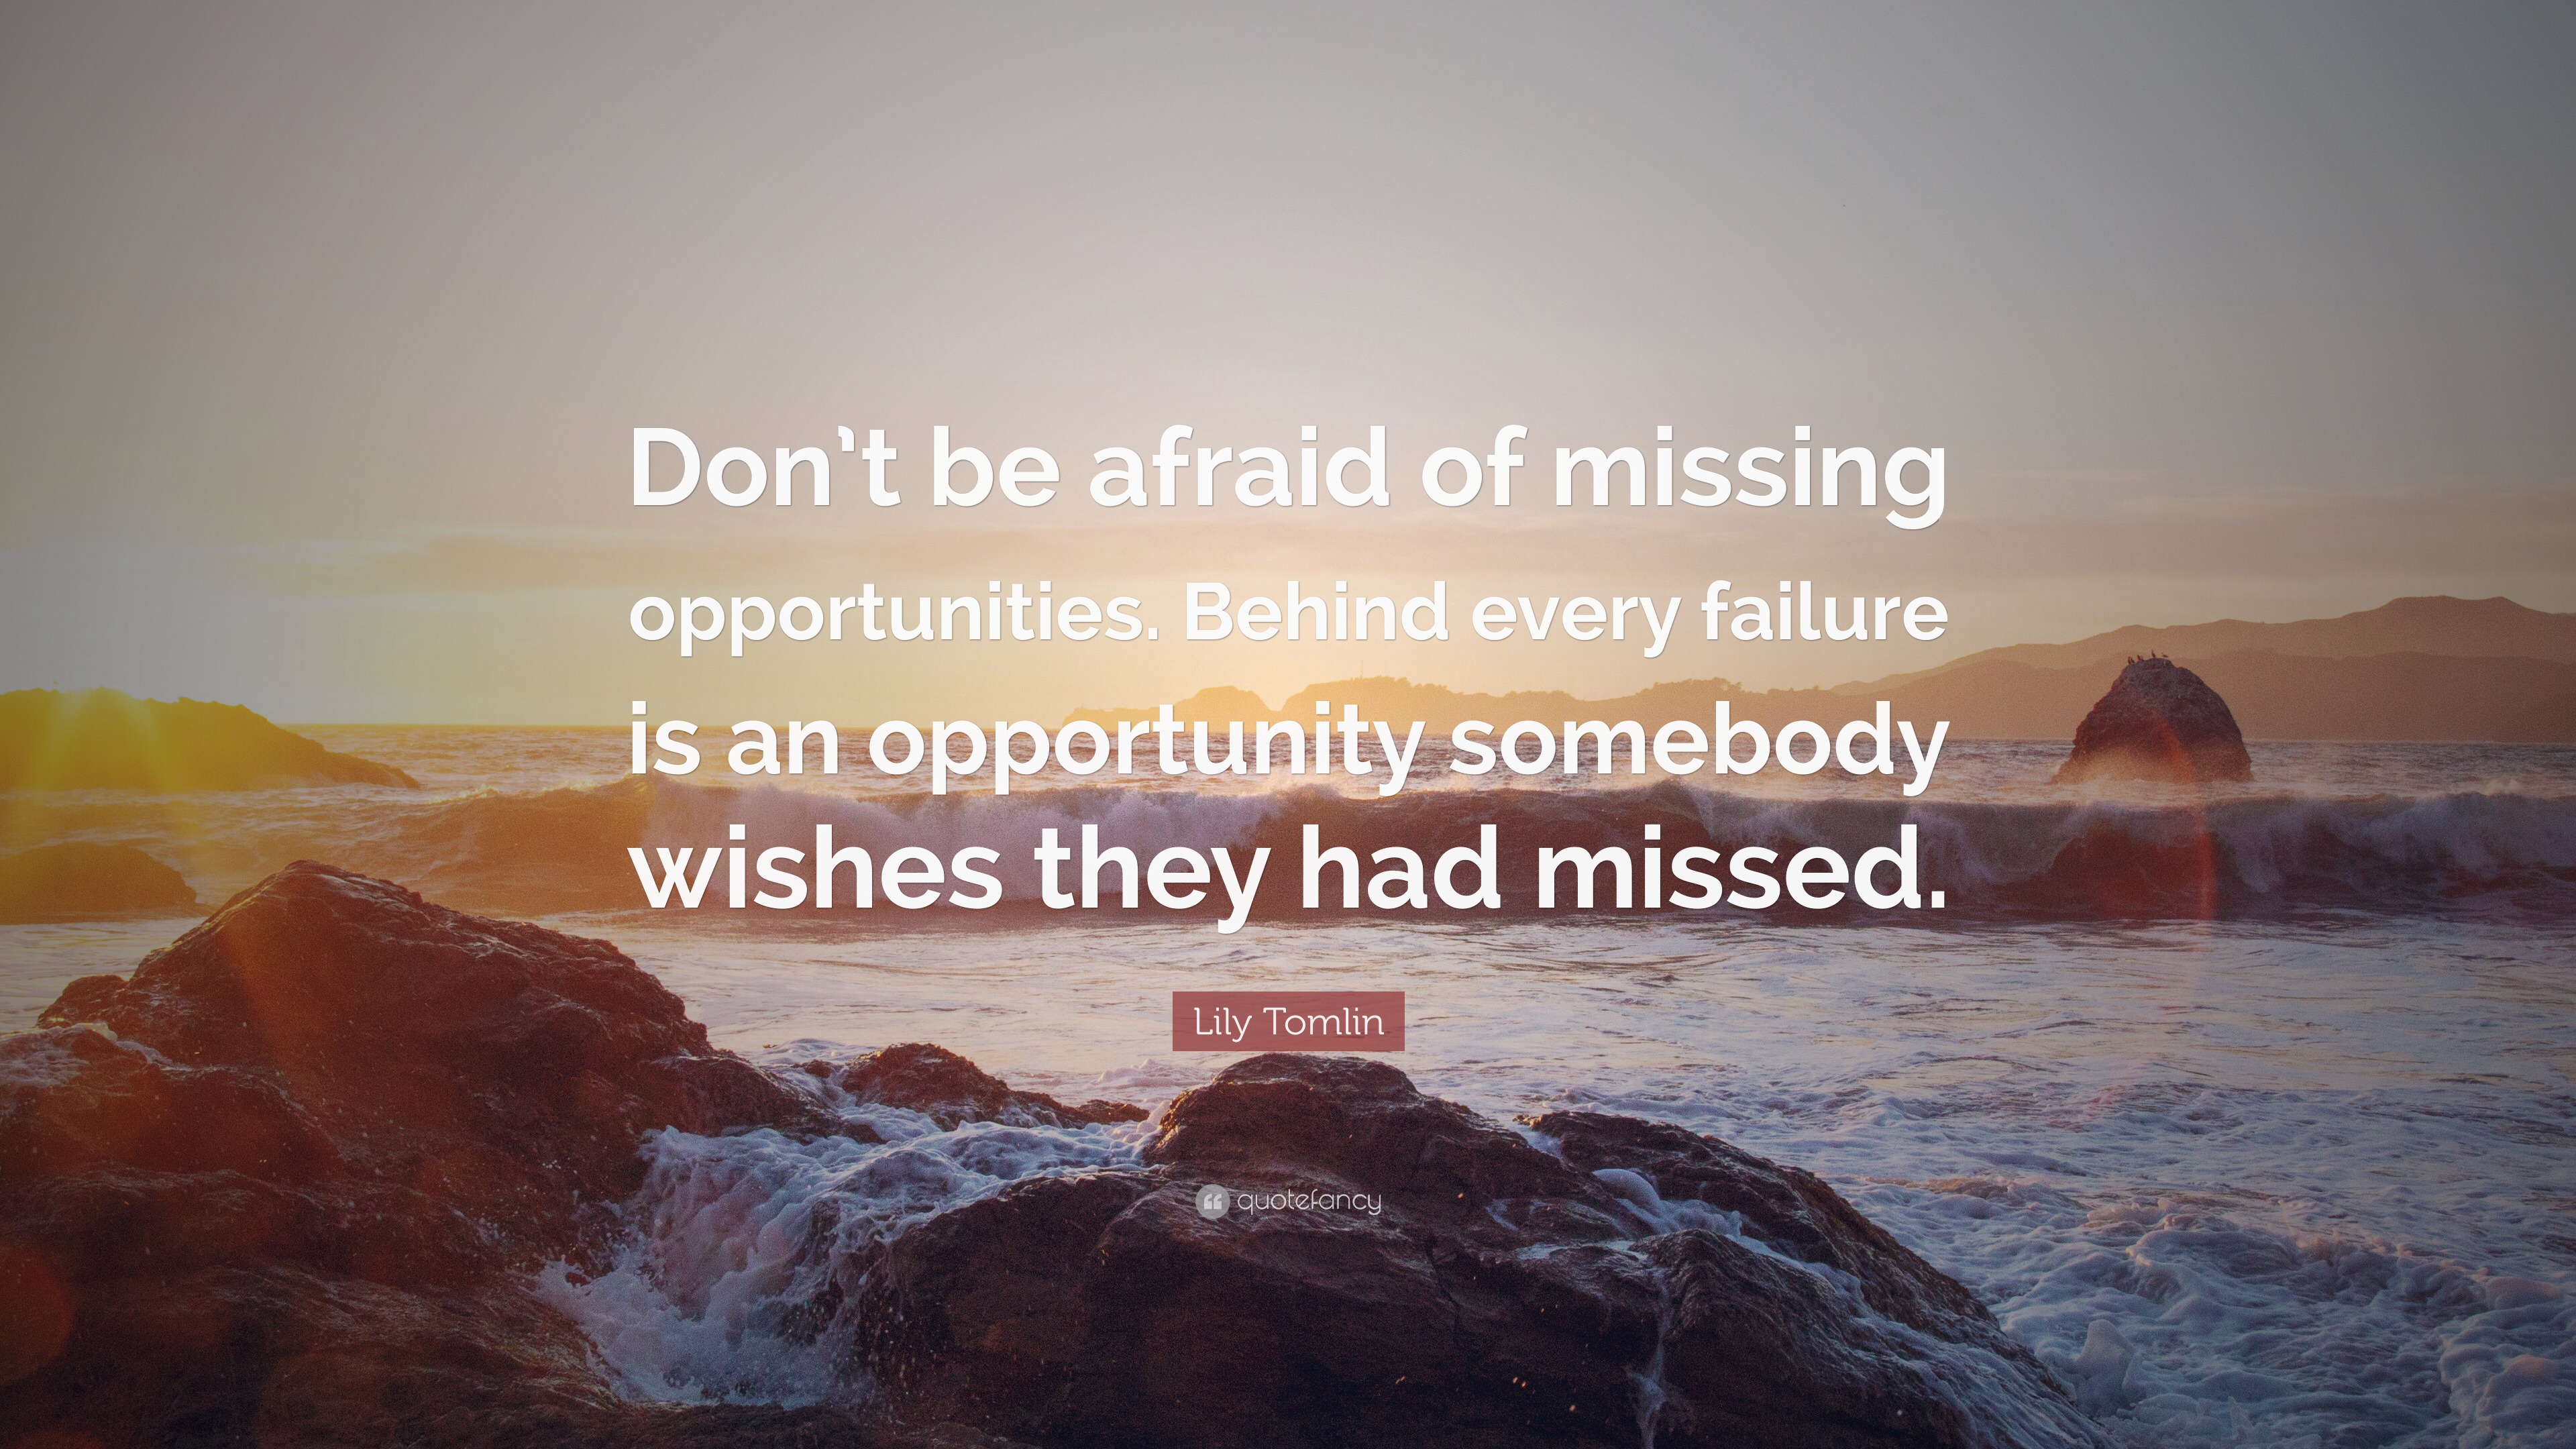 Lily Tomlin Quote: “Don’t be afraid of missing opportunities. Behind